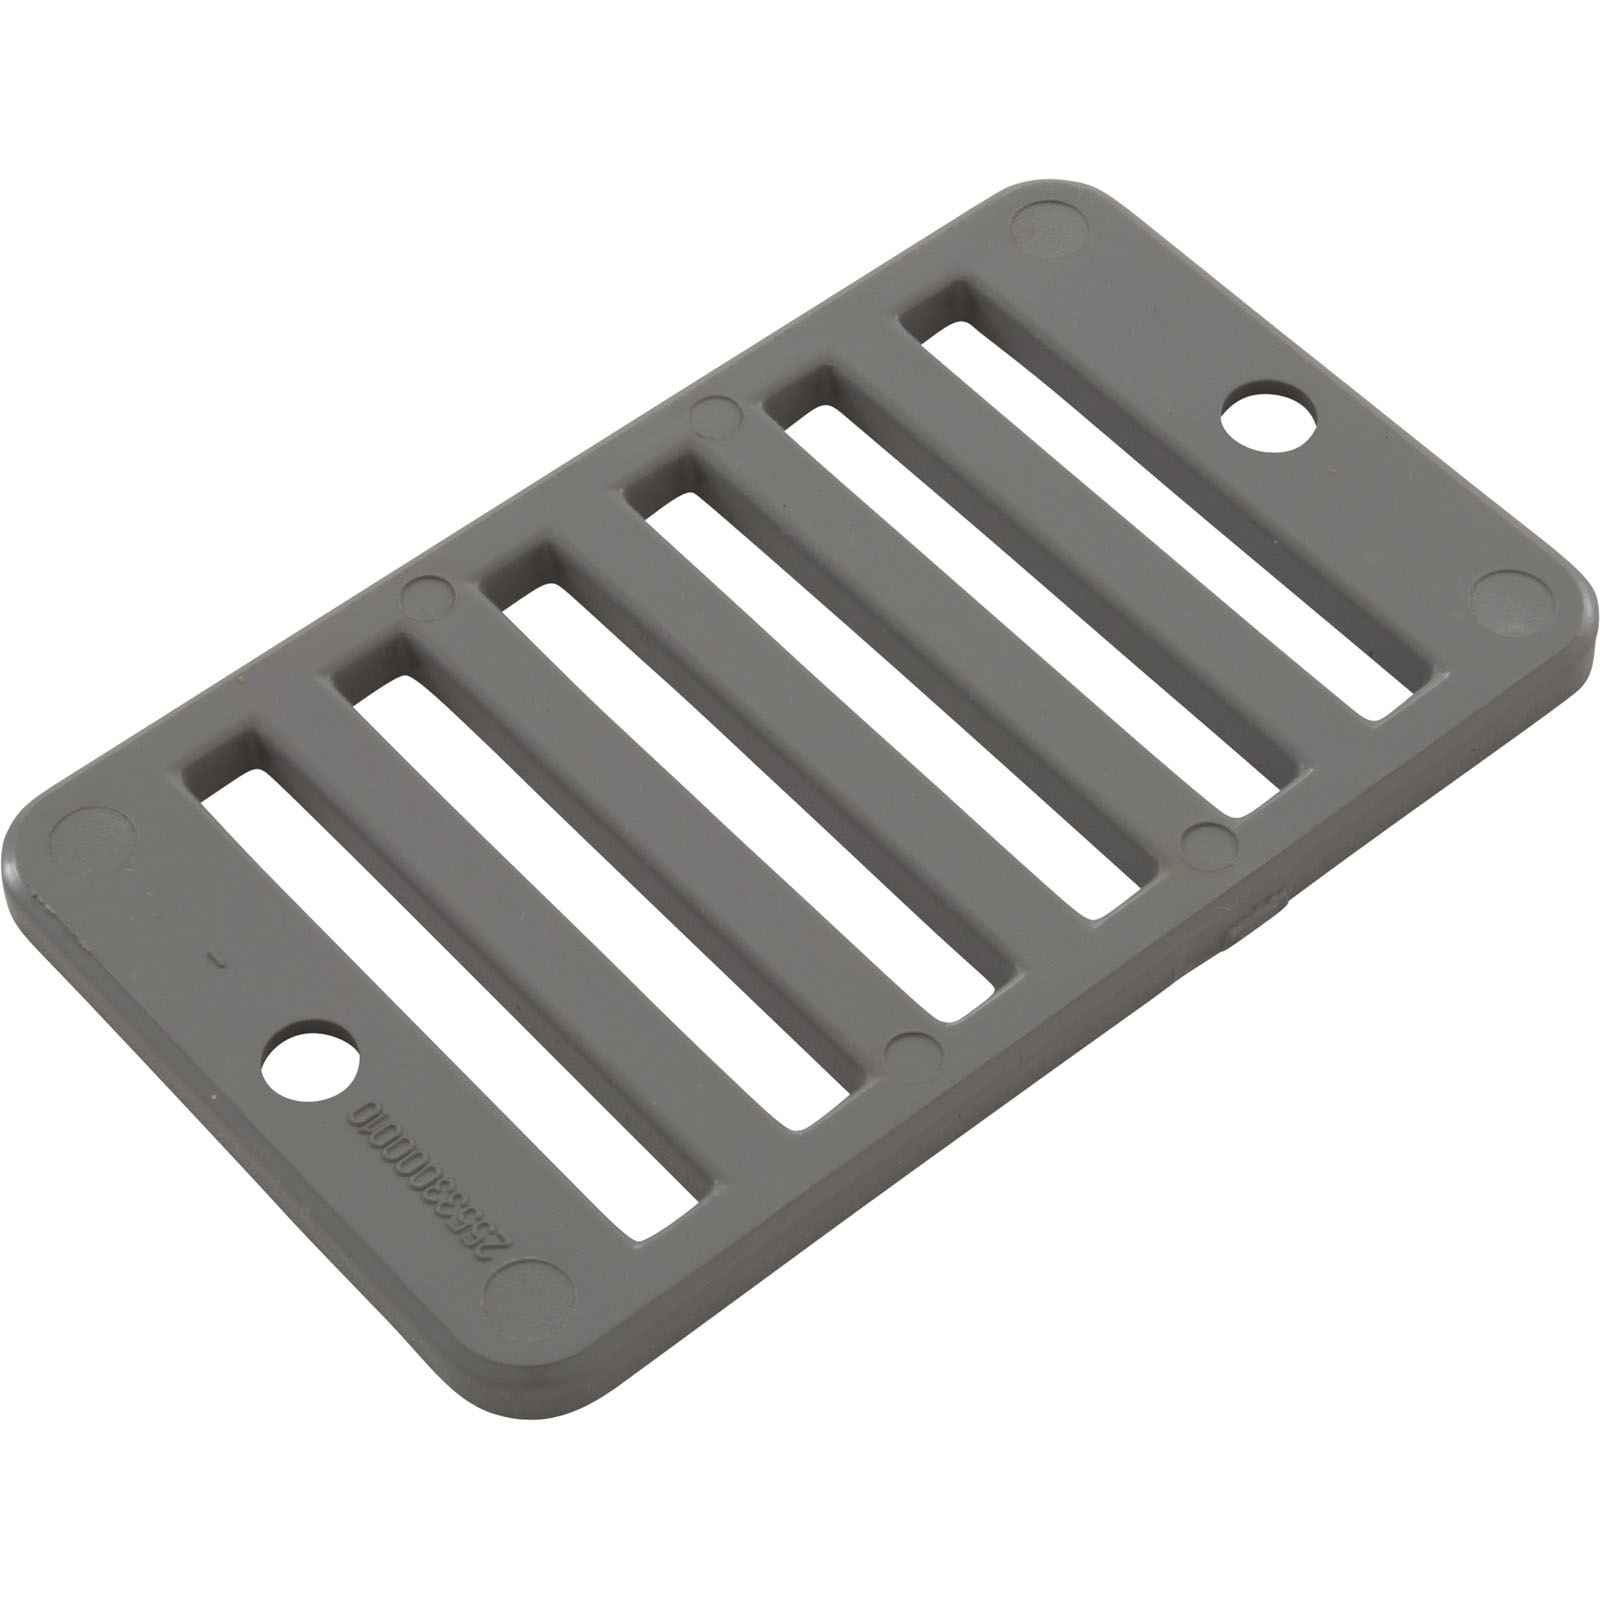 Picture of 25533-001-010 Rectangular Grate W/ Screws(Gy)